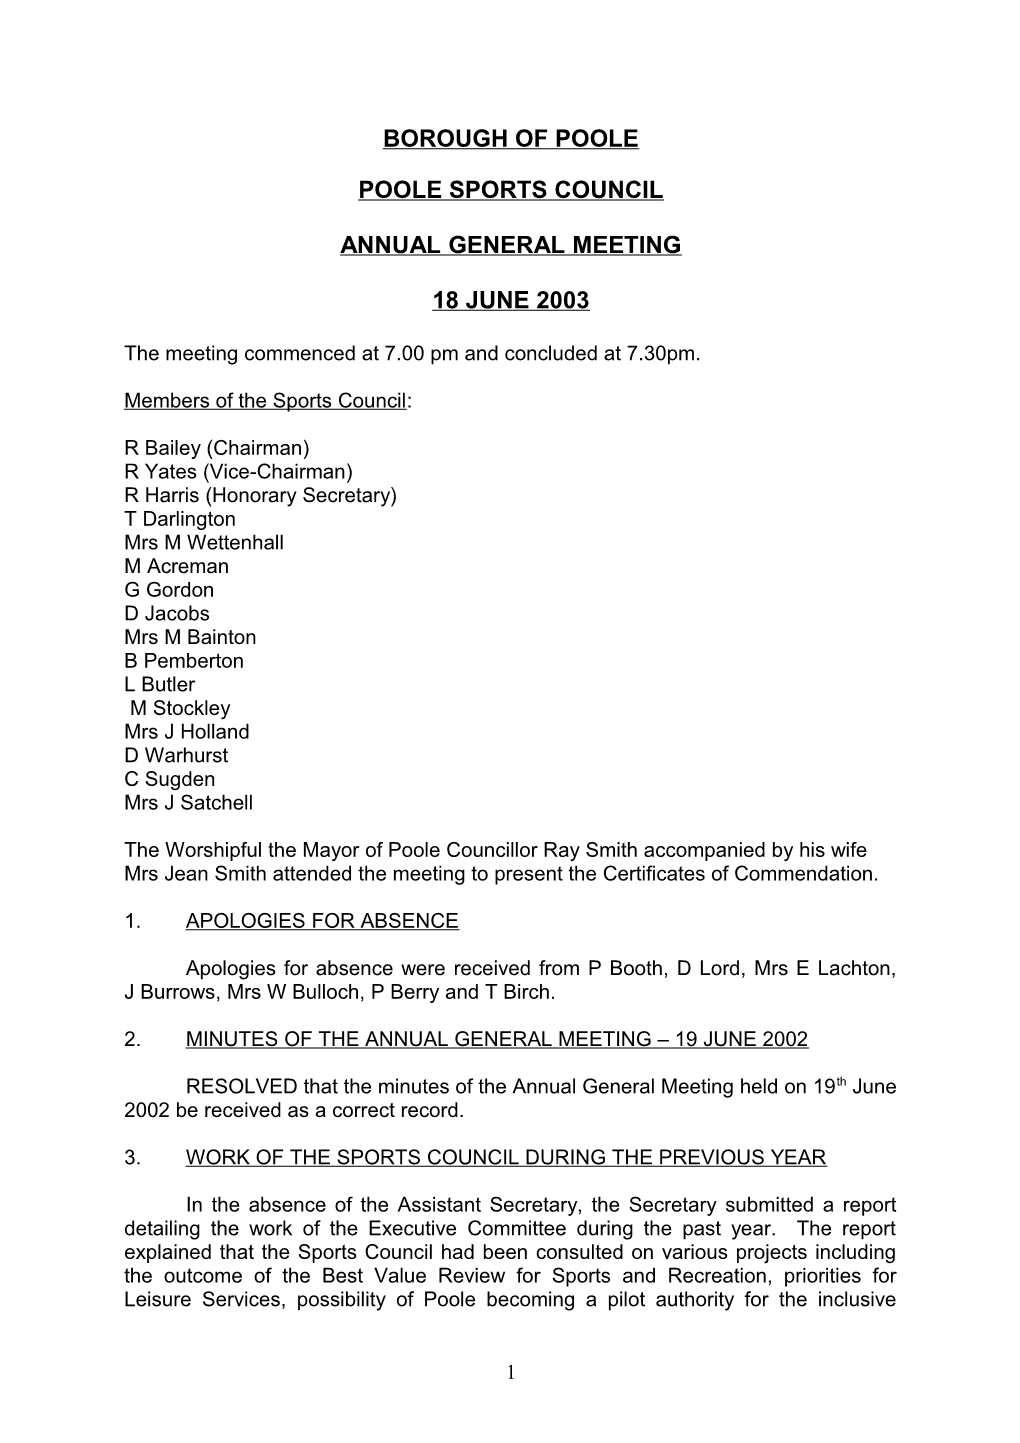 Minutes - Poole Sports Council Annual General Meeting - 16 June 2003